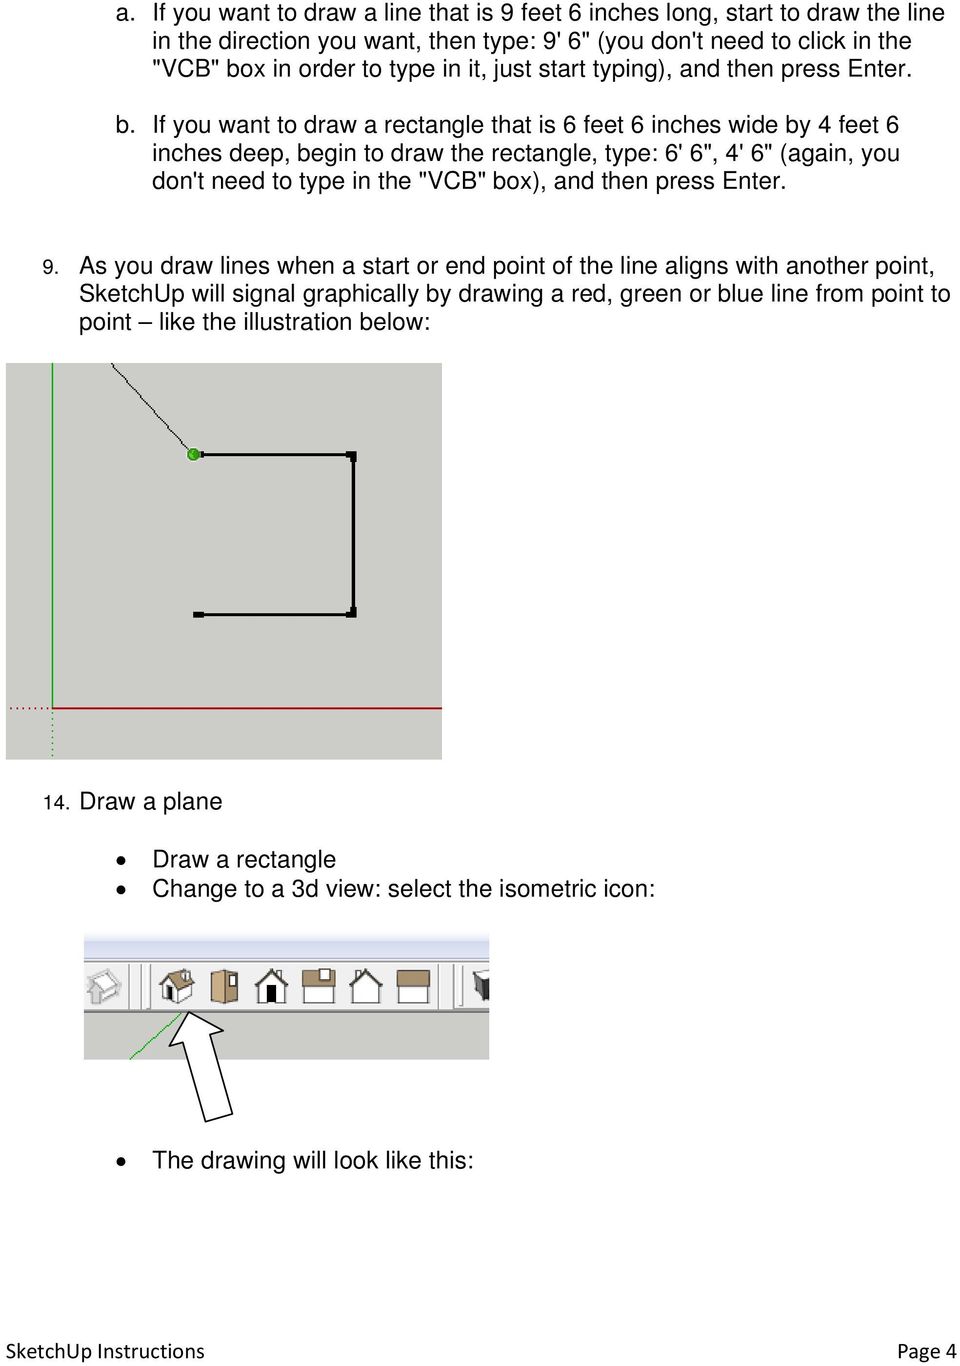 If you want to draw a rectangle that is 6 feet 6 inches wide by 4 feet 6 inches deep, begin to draw the rectangle, type: 6' 6", 4' 6" (again, you don't need to type in the "VCB" box), and then